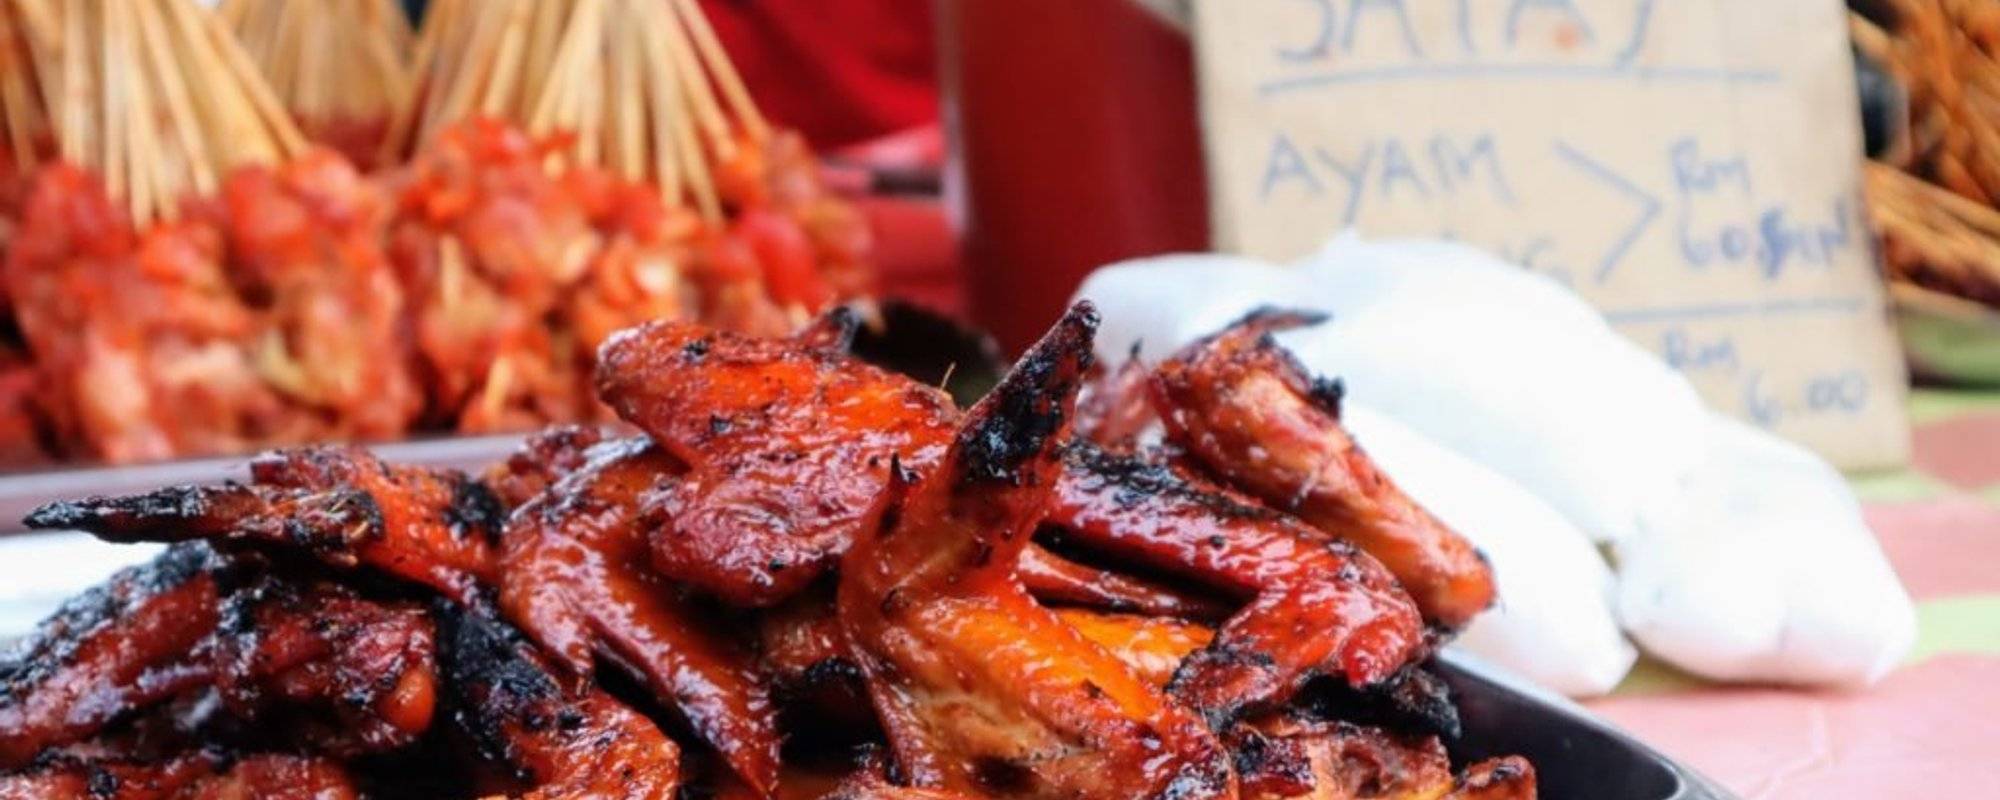 Grilled Chicken butts at Street food market in KL